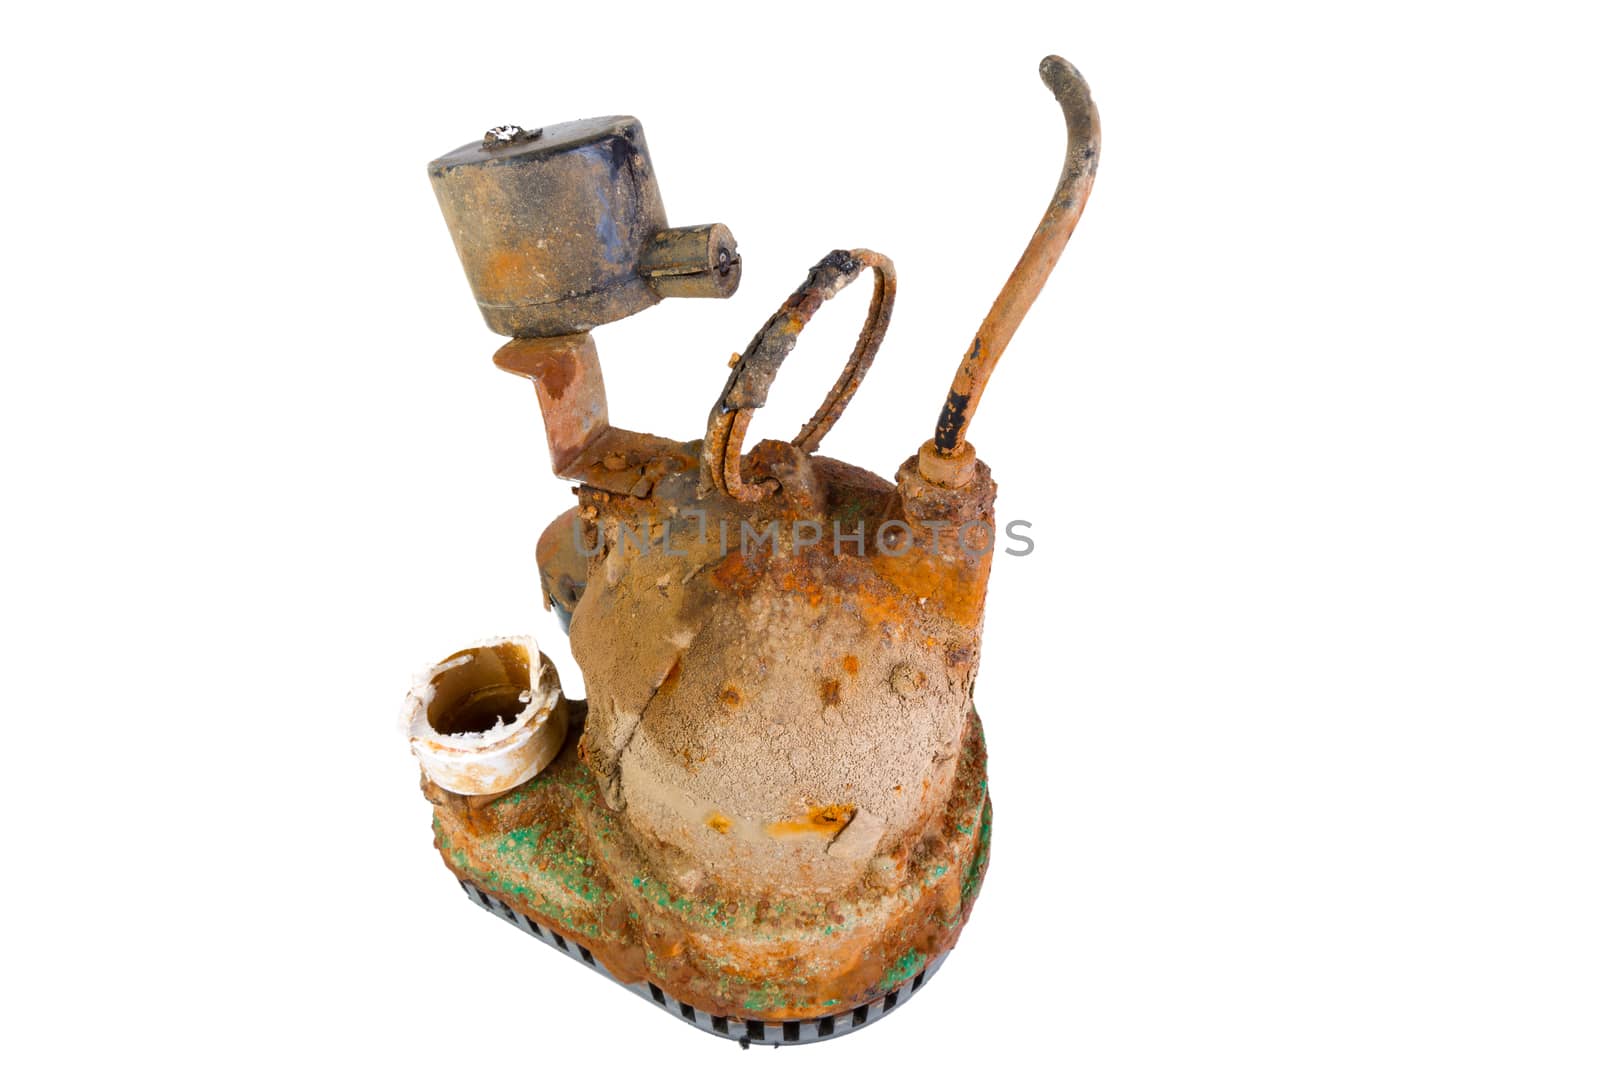 Old broken rusty sump pump that has been removed from a drainage sump as obsolete, isolated on white